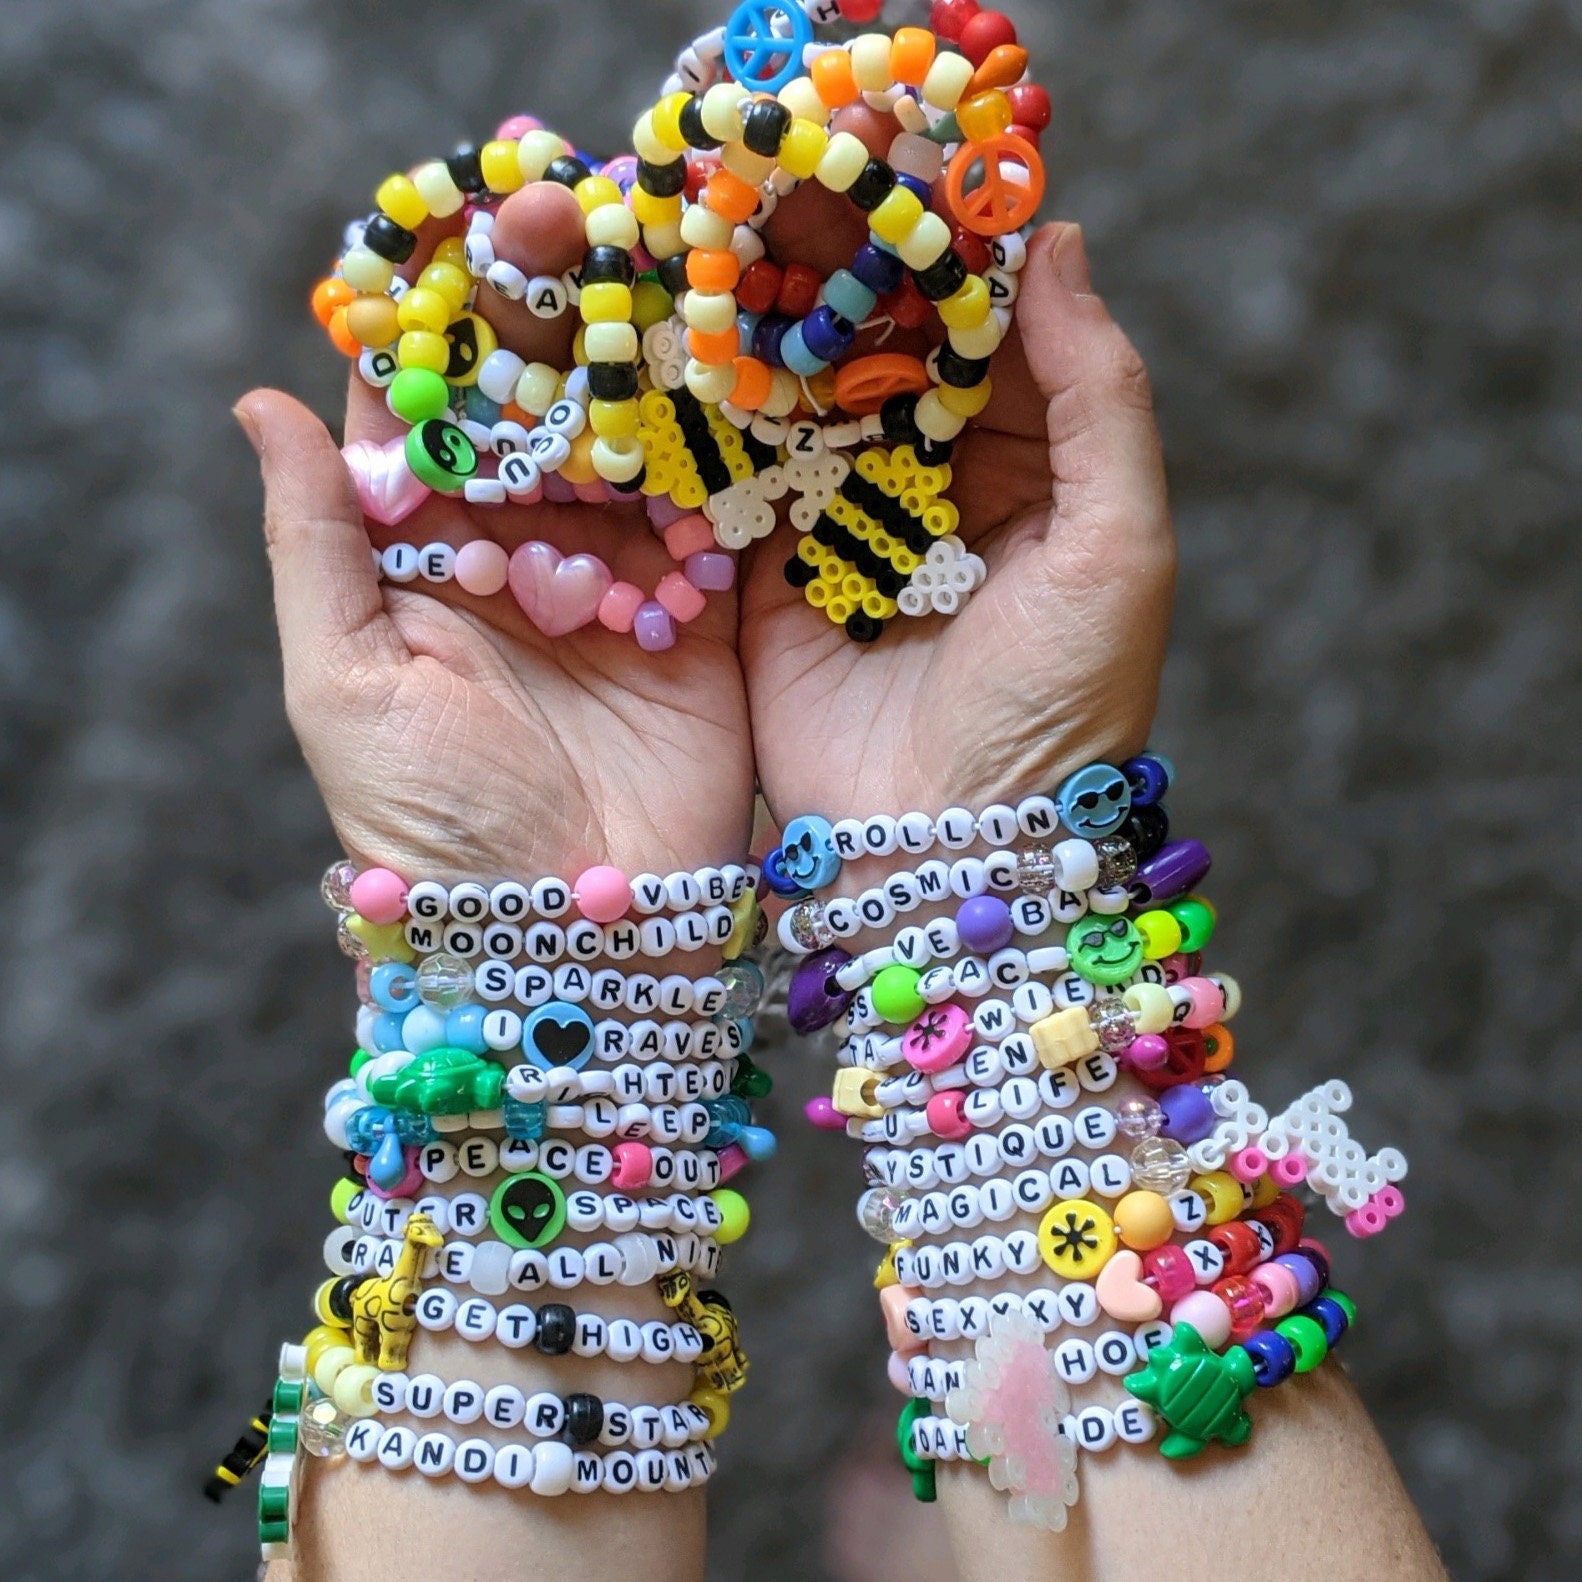 How to Make Kandi (with Pictures) - wikiHow